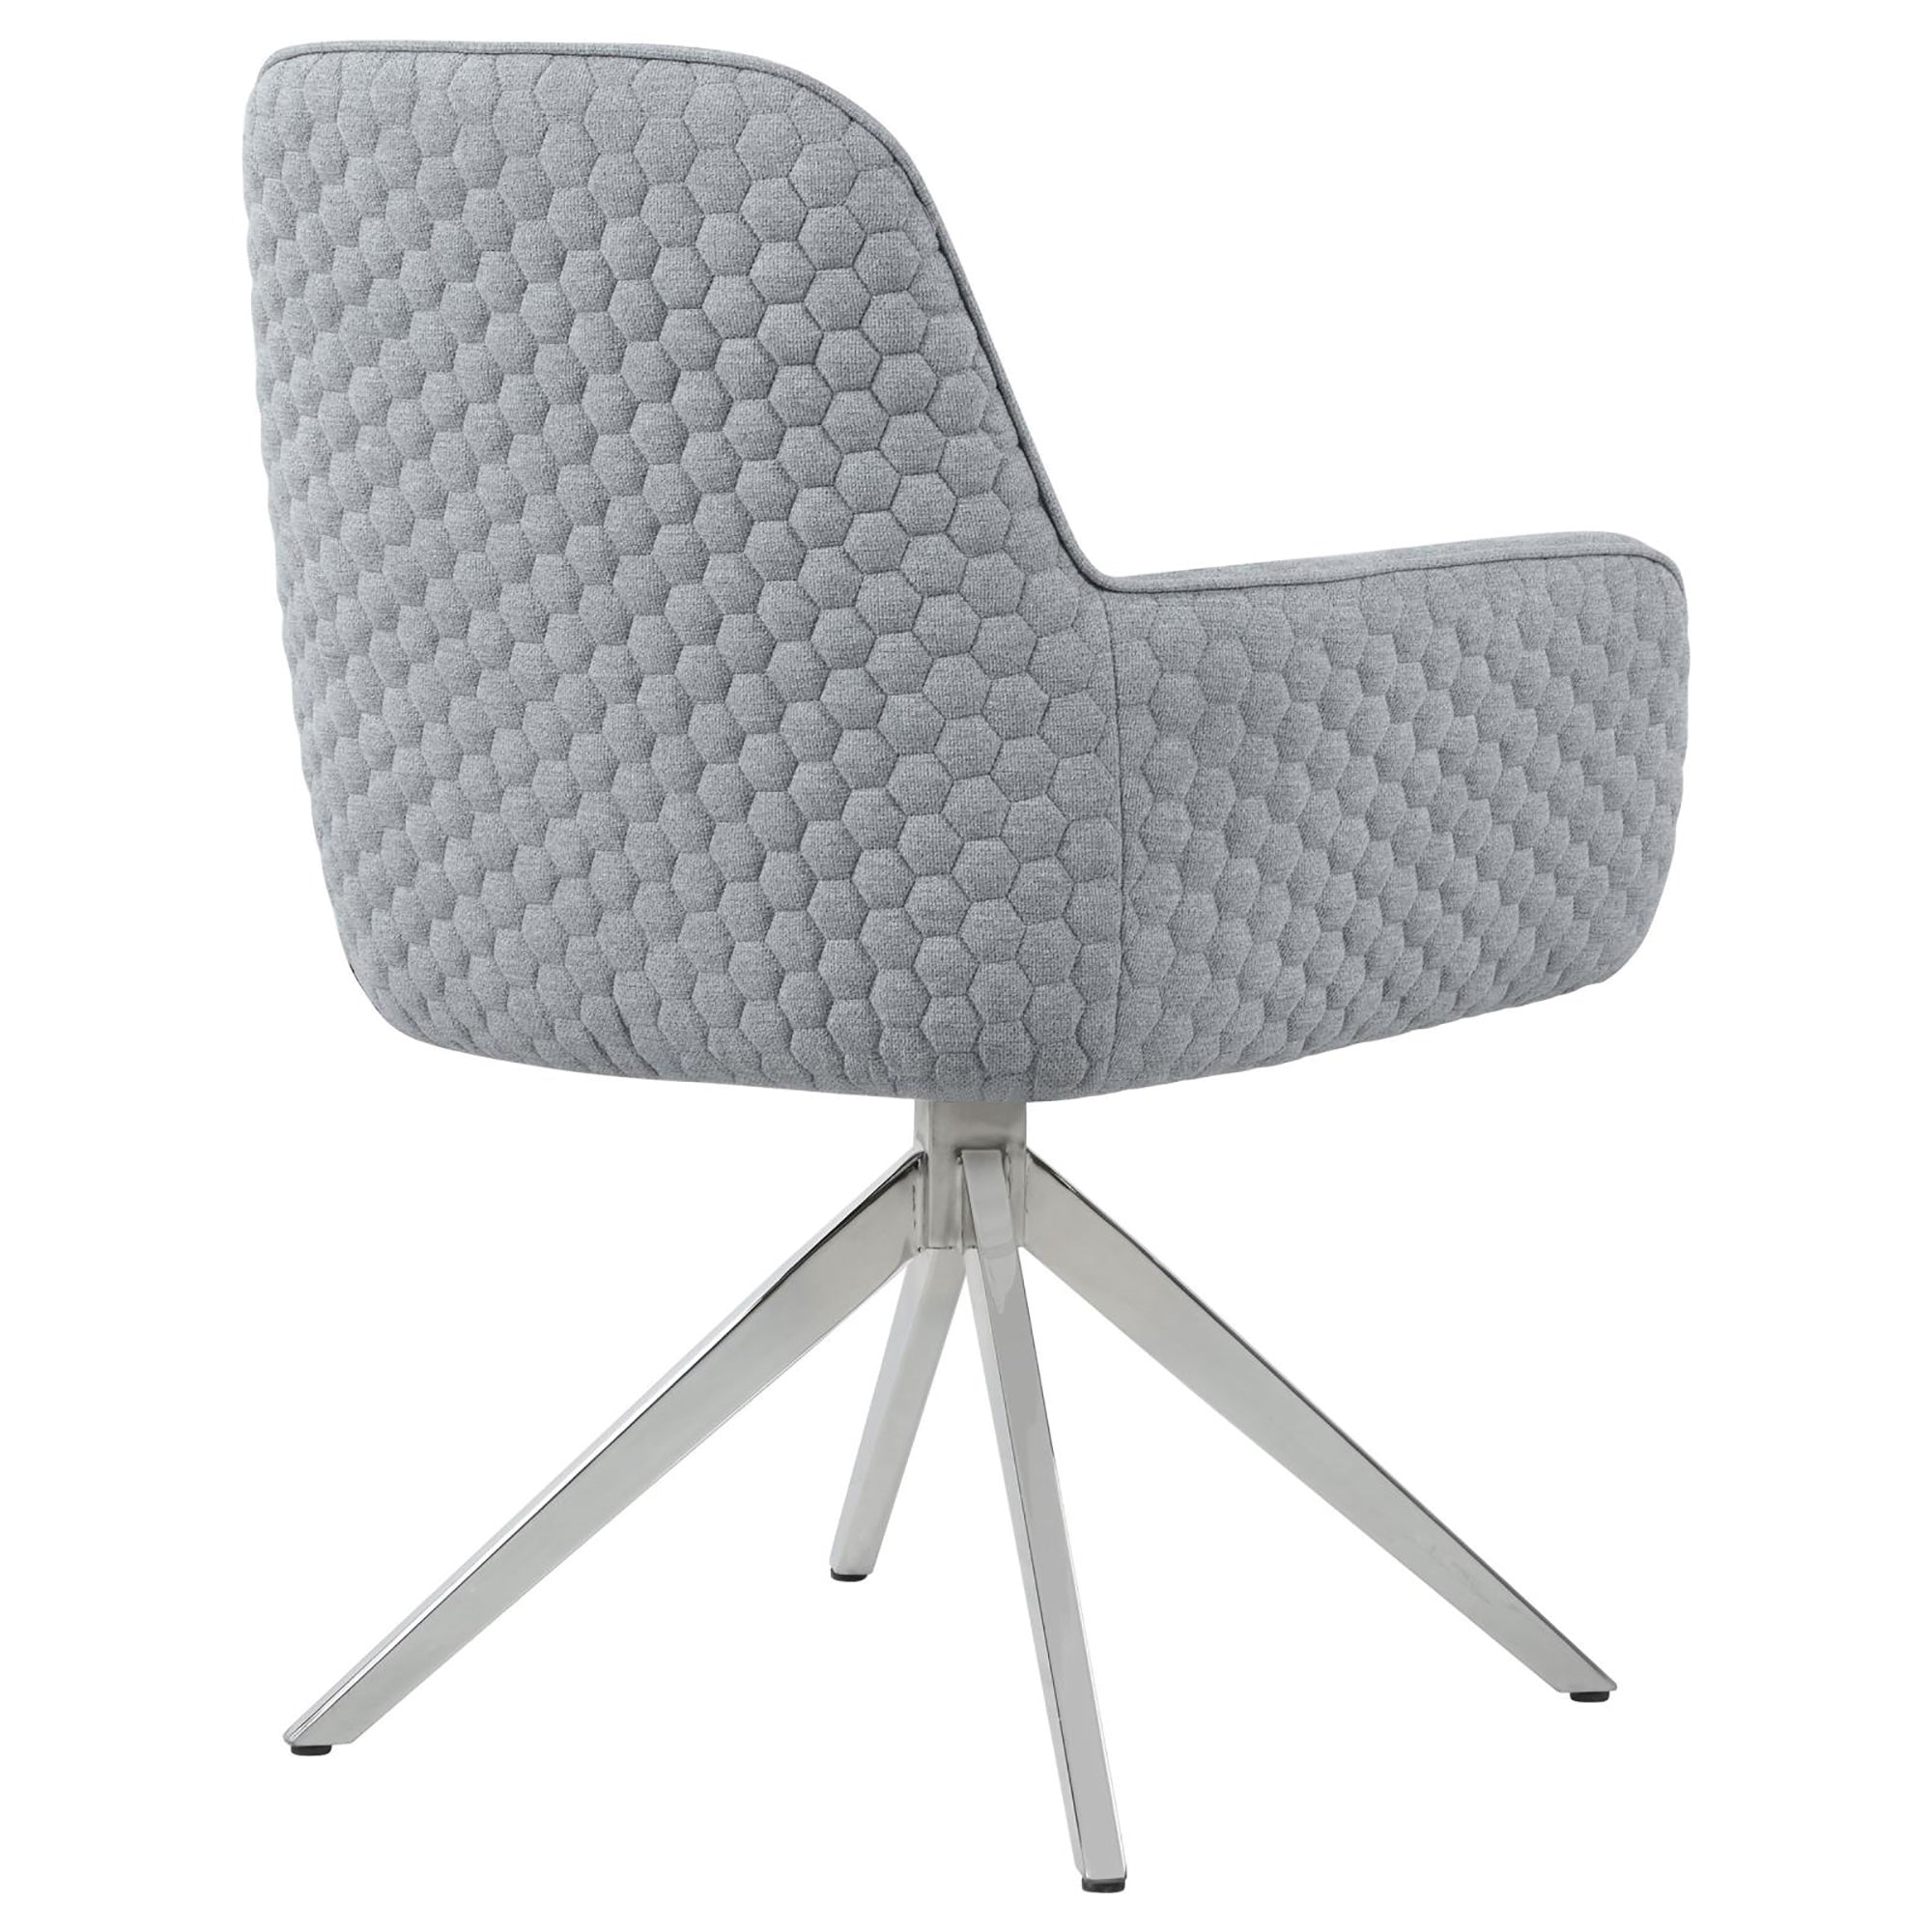 Light Grey and Chrome Flare Arm Side Chair